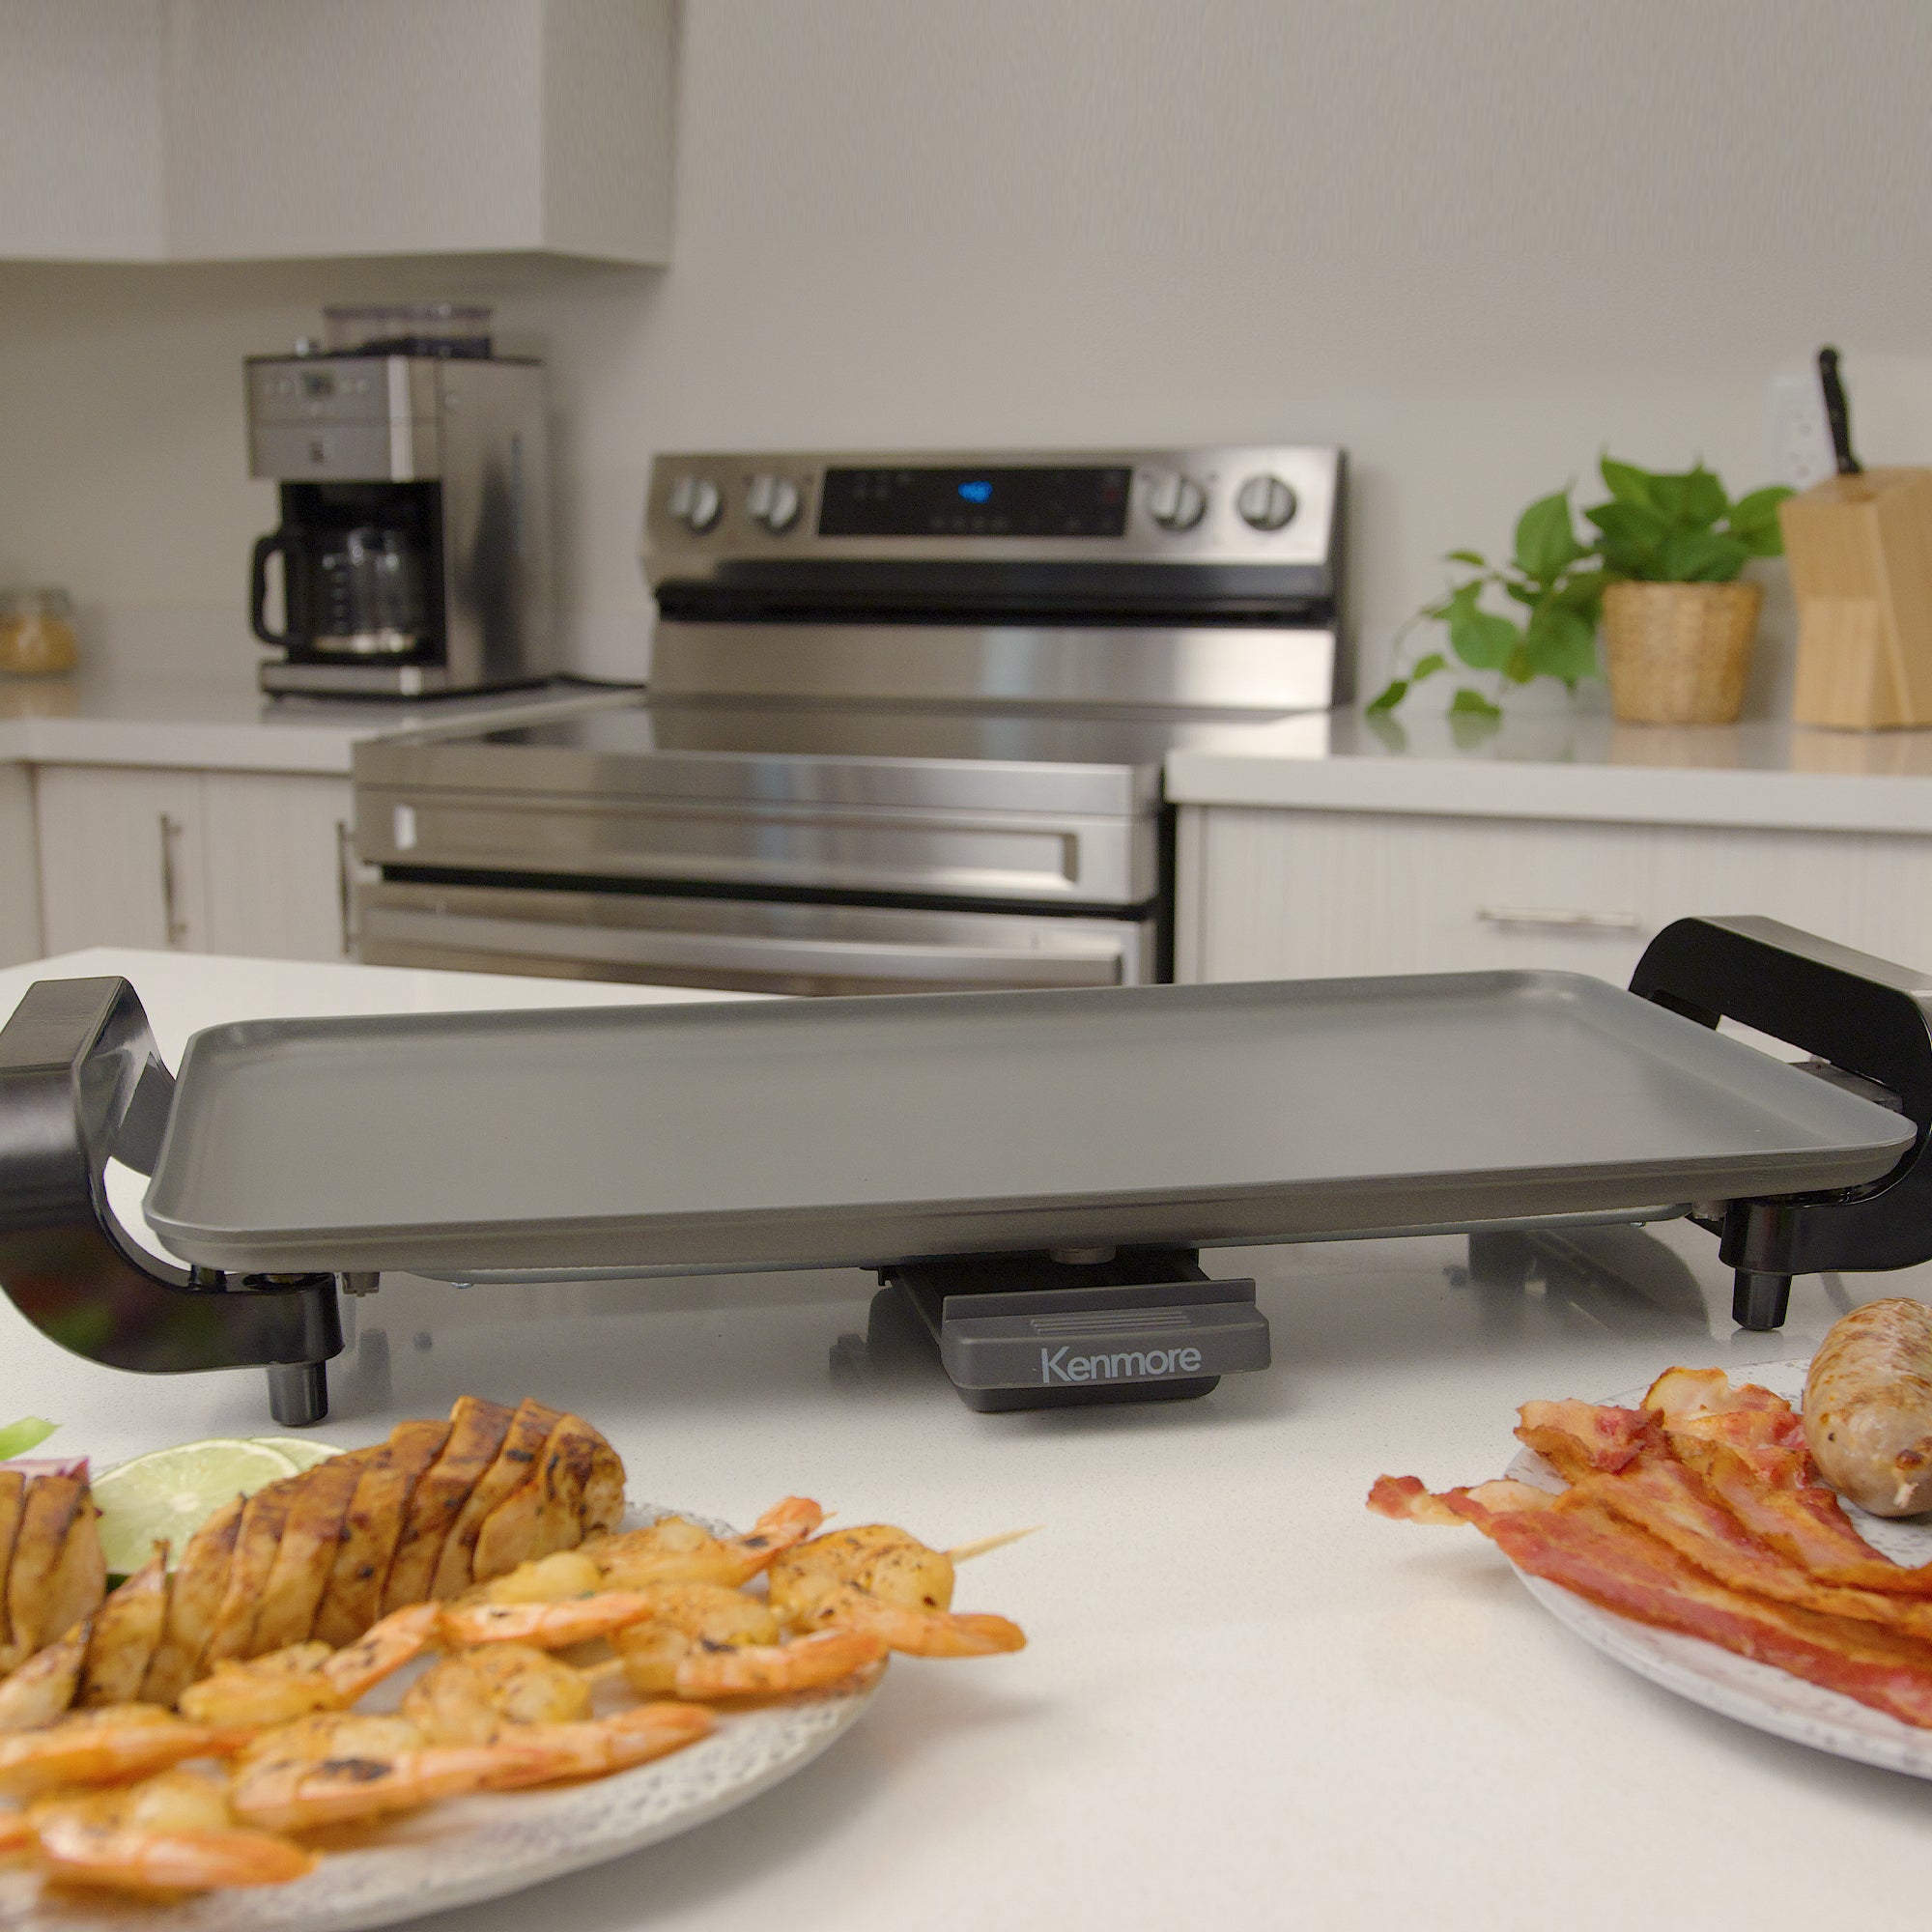 Kenmore non-stick electric griddle on a white countertop with stainless steel appliances in the background and plates of cooked food in front of it